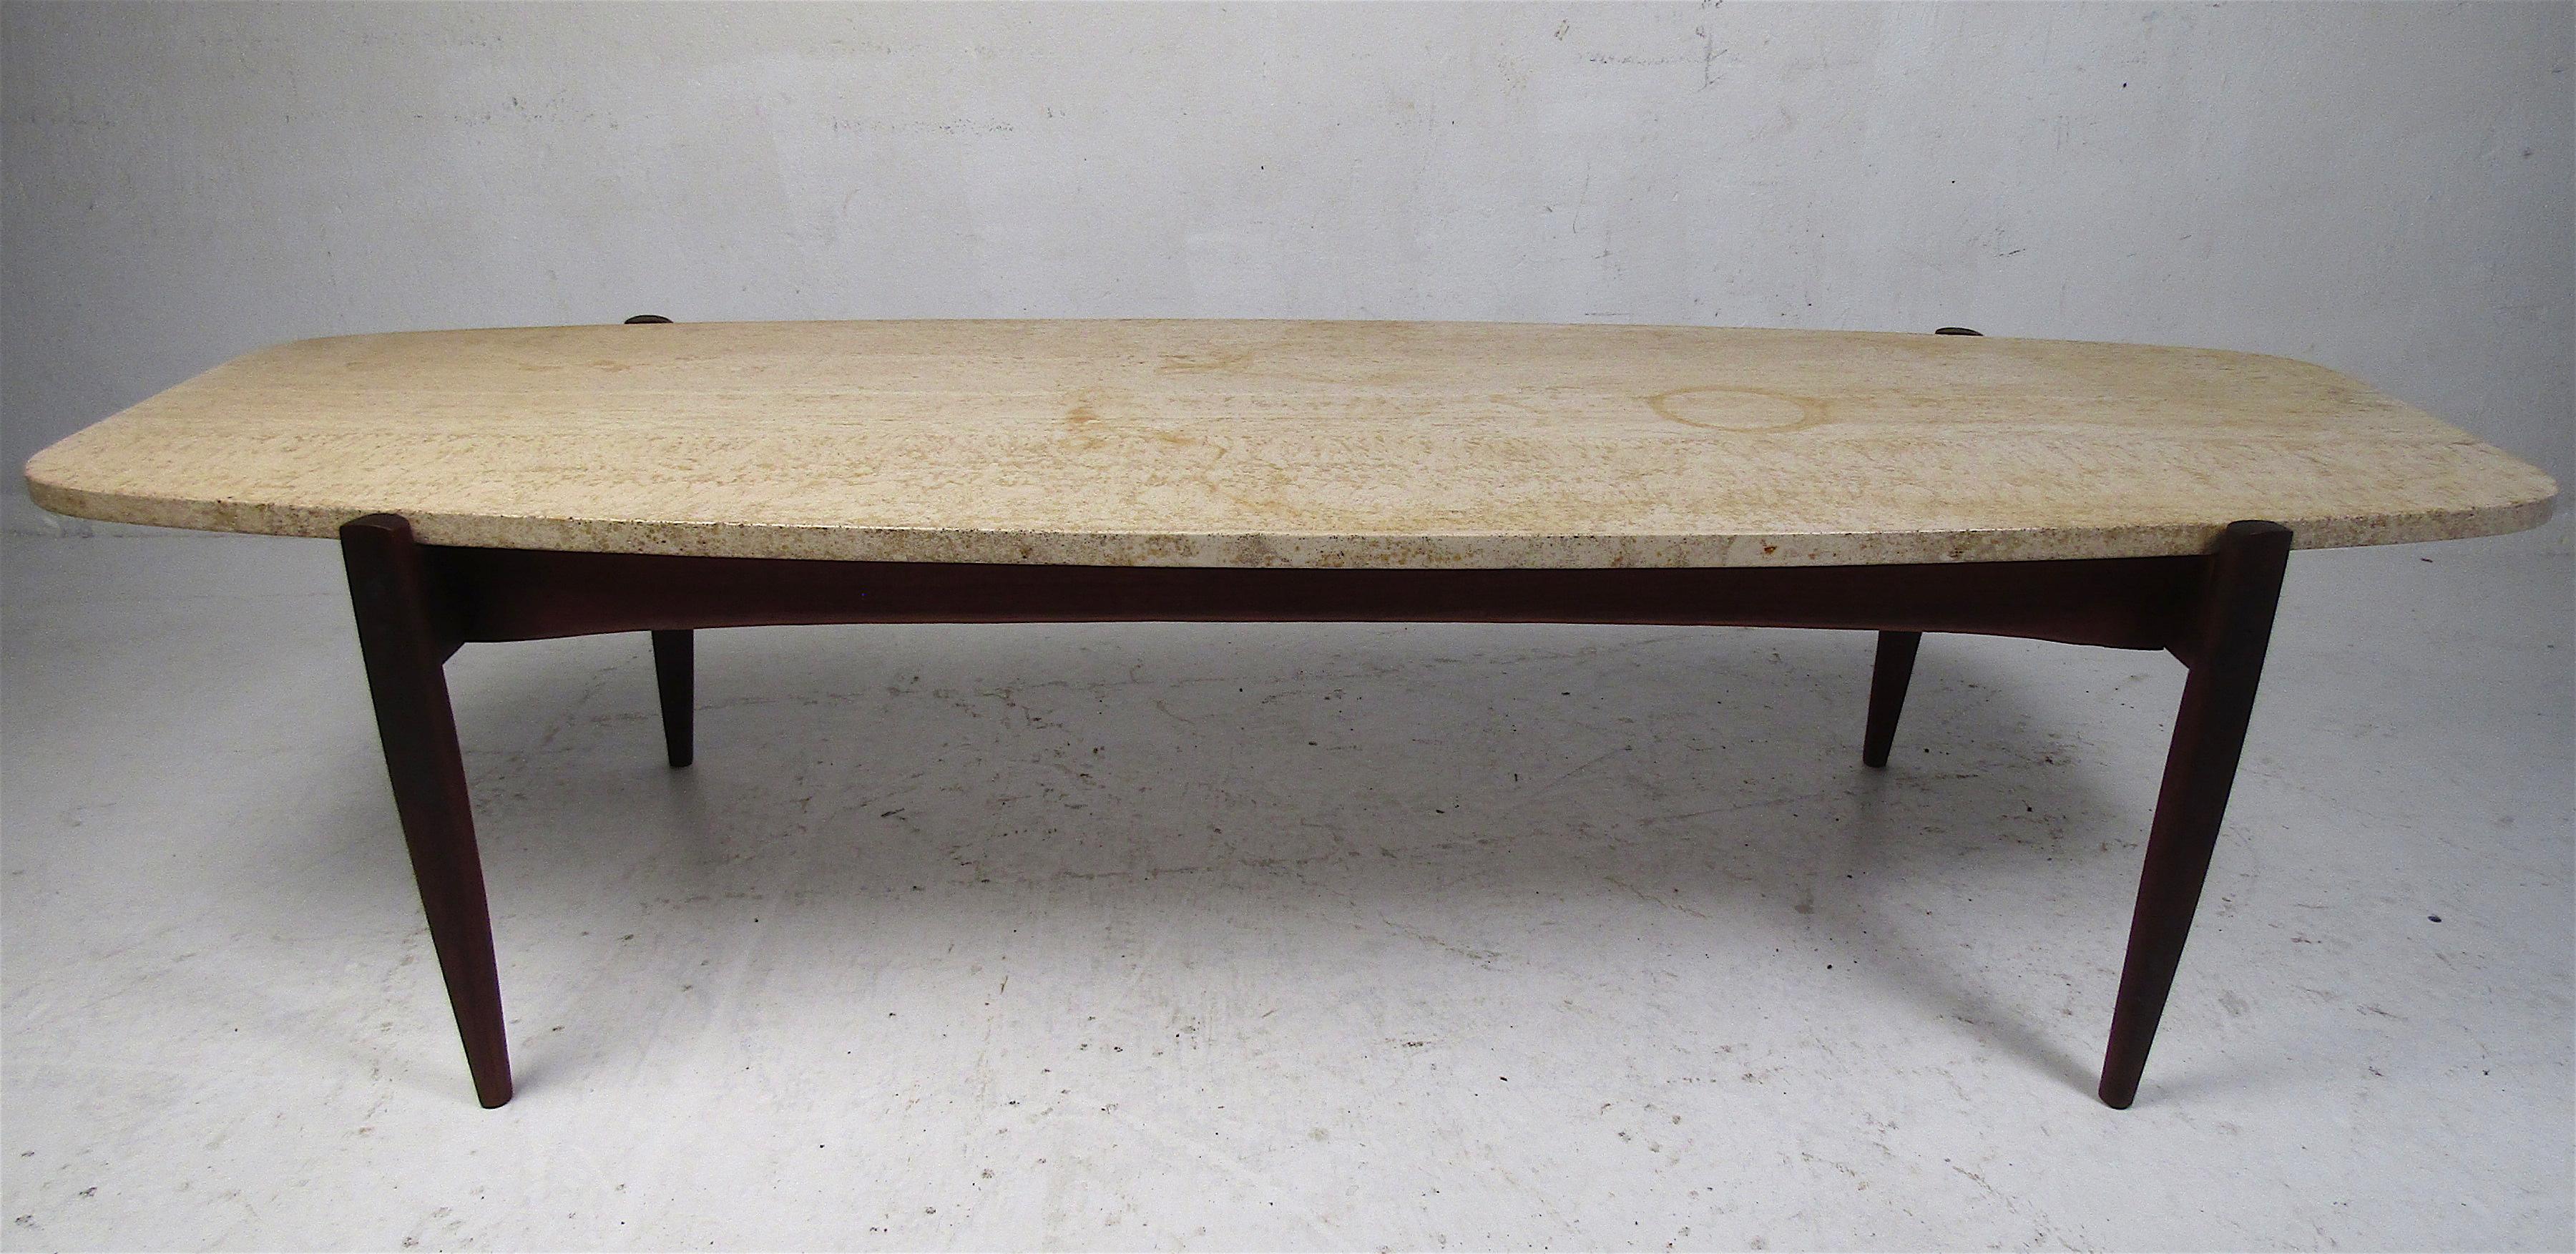 This stunning vintage modern coffee table boasts a uniquely shaped travertine top and a teak base with sculpted legs. A Danish design that looks great in any modern interior. Please confirm item location (NY or NJ).